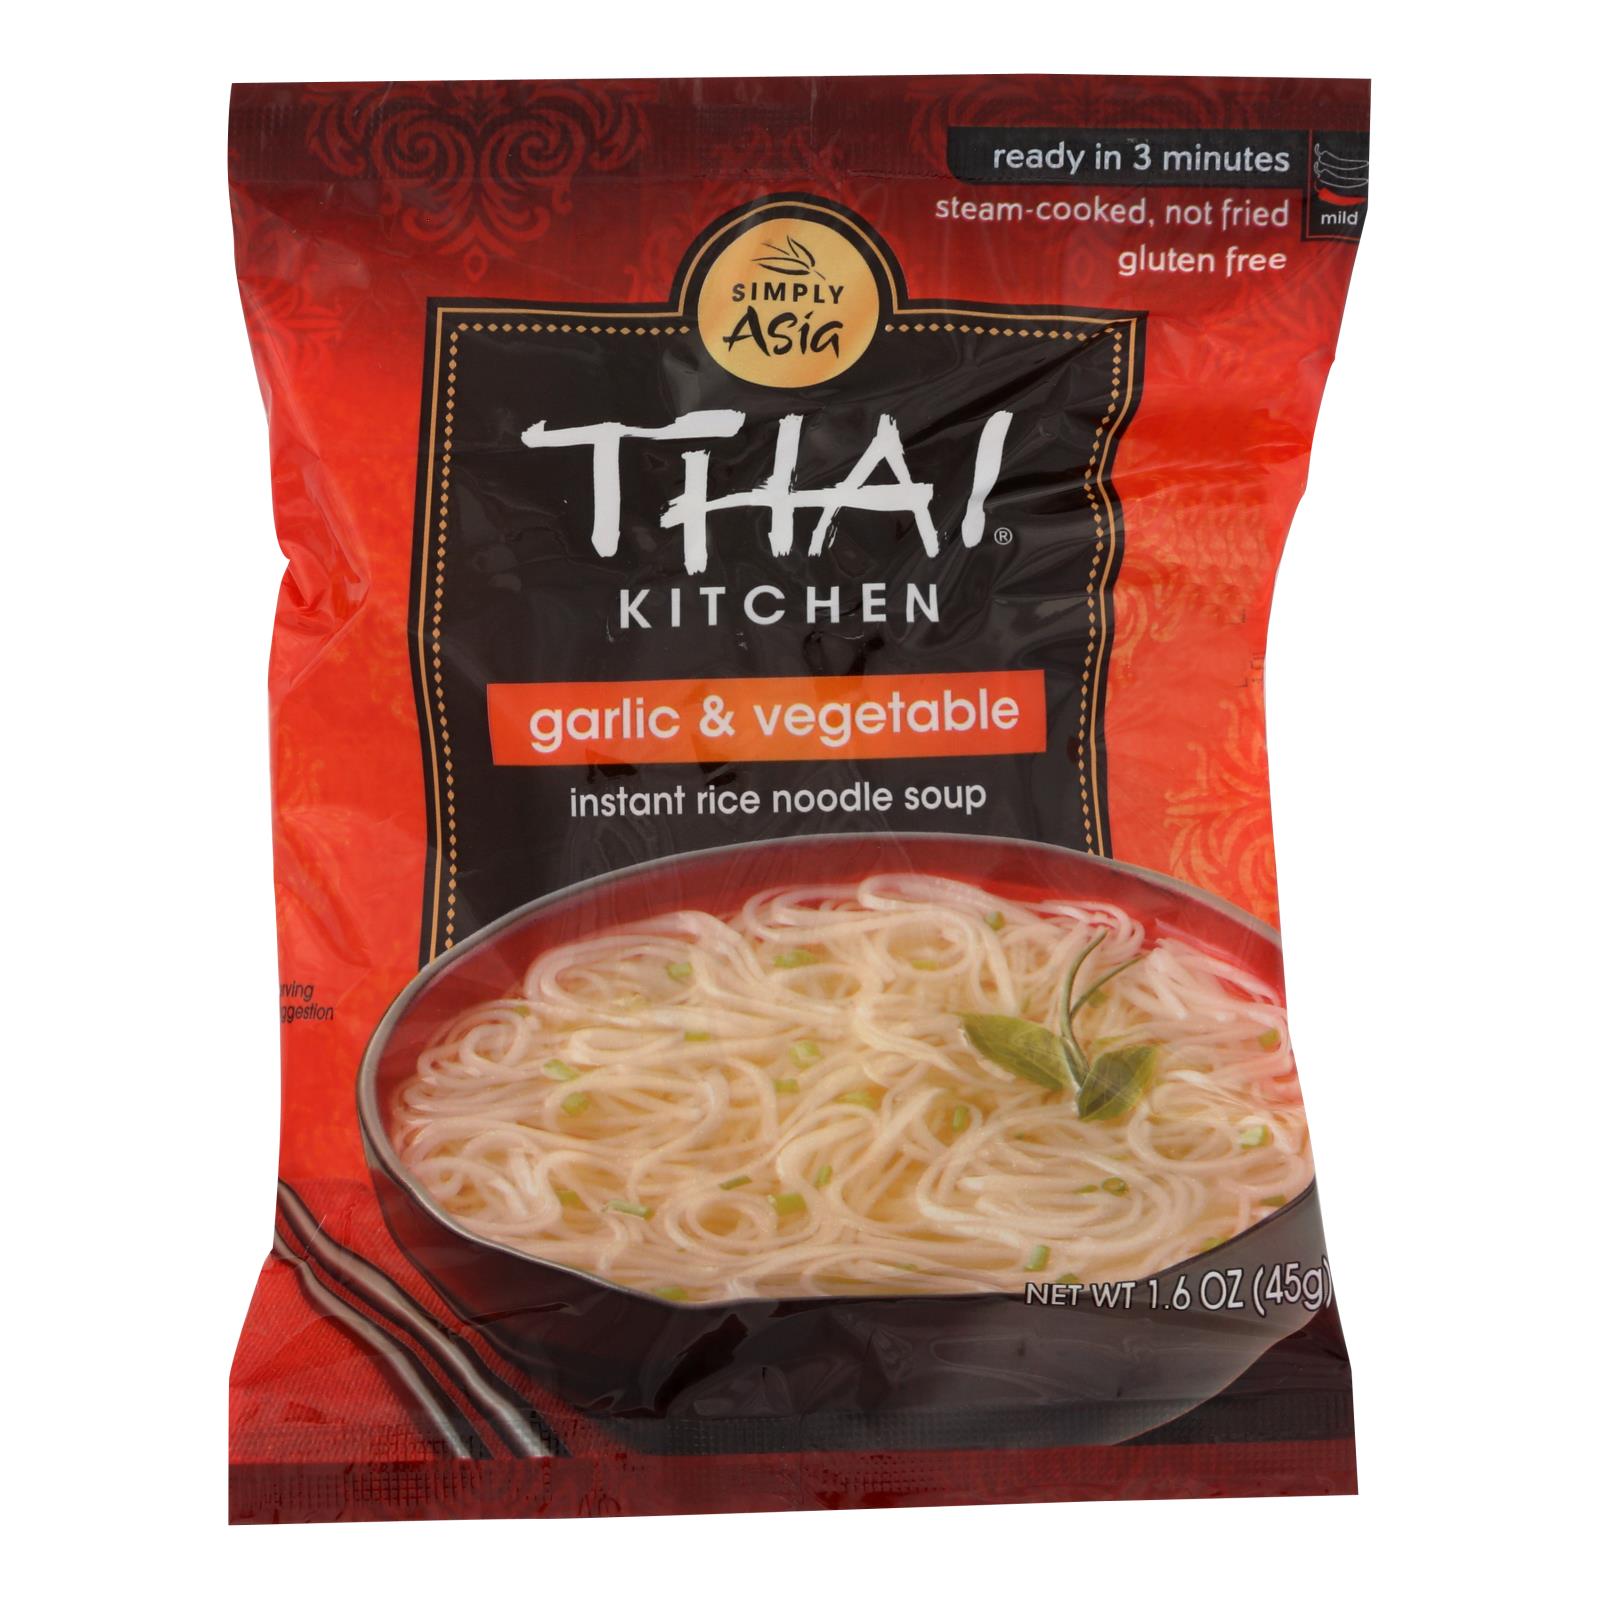 Thai Kitchen Instant Rice Noodle Soup - Garlic And Vegetable - Mild - 1.6 Oz - Case Of 6 - Whole Green Foods